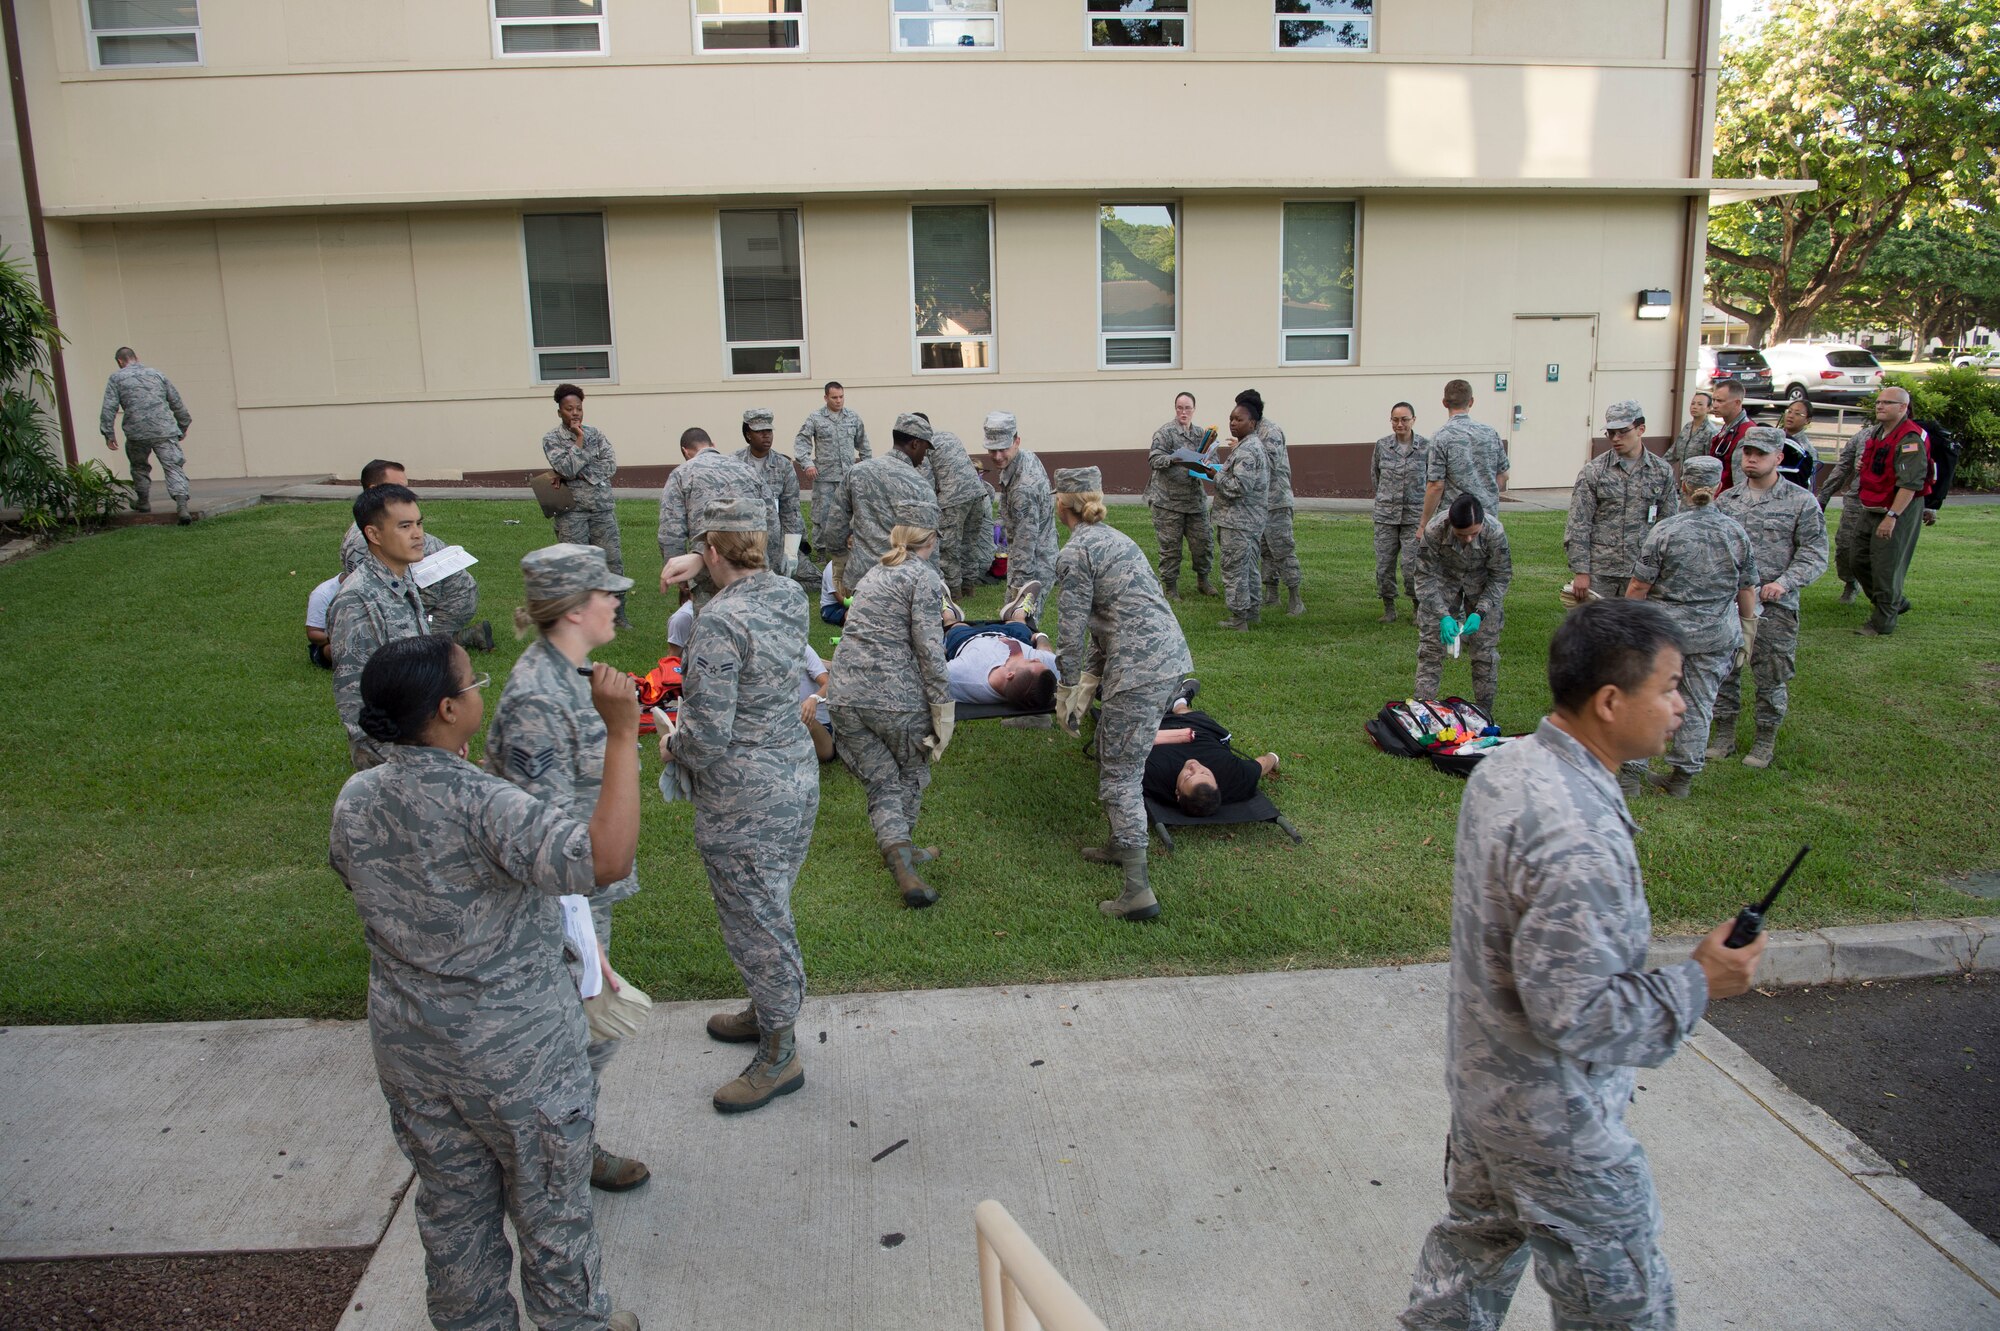 Airmen from the 15th Medical Group work together to provide medical aid for mock casualties during a mass-casualty scenario during the Rim of the Pacific exercise at Joint Base Pearl Harbor-Hickam, July 12, 2018. Twenty-five nations, 46 ships, five submarines, about 200 aircraft and 25,000 personnel are participating in RIMPAC from June 27 to Aug. 2 in and around the Hawaiian Islands and Southern California. The world’s largest international maritime exercise, RIMPAC provides a unique training opportunity while fostering and sustaining cooperative relationships among participants critical to ensuring the safety of sea lanes and security of the world’s oceans. RIMPAC 2018 is the 26th exercise in the series that began in 1971. (U.S. Air Force photo by Tech. Sgt. Heather Redman)